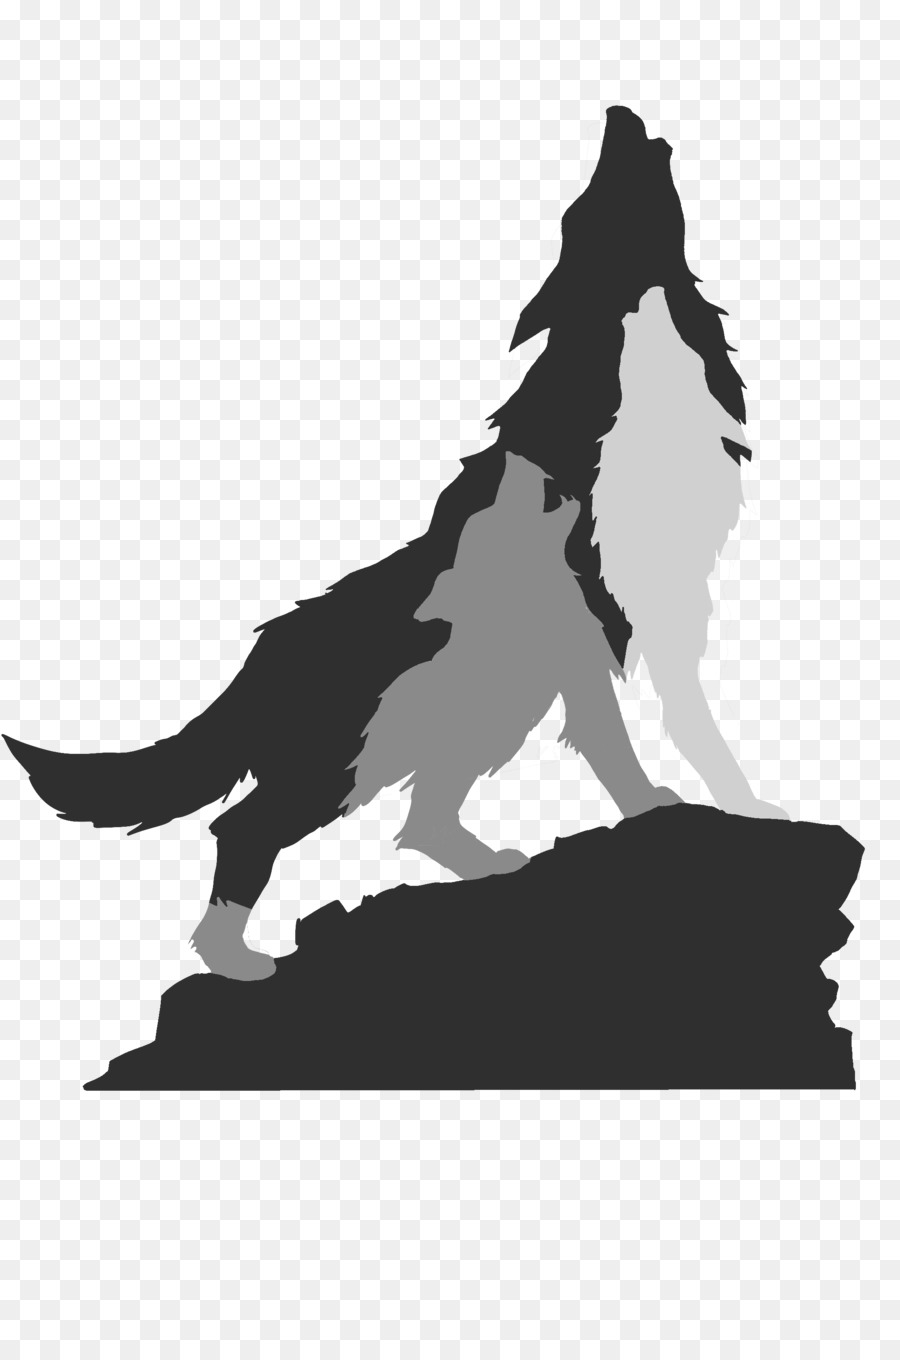 Silhouette Project Wolfpack Dog - wolf png download - 2100*3150 - Free Transparent Silhouette png Download.